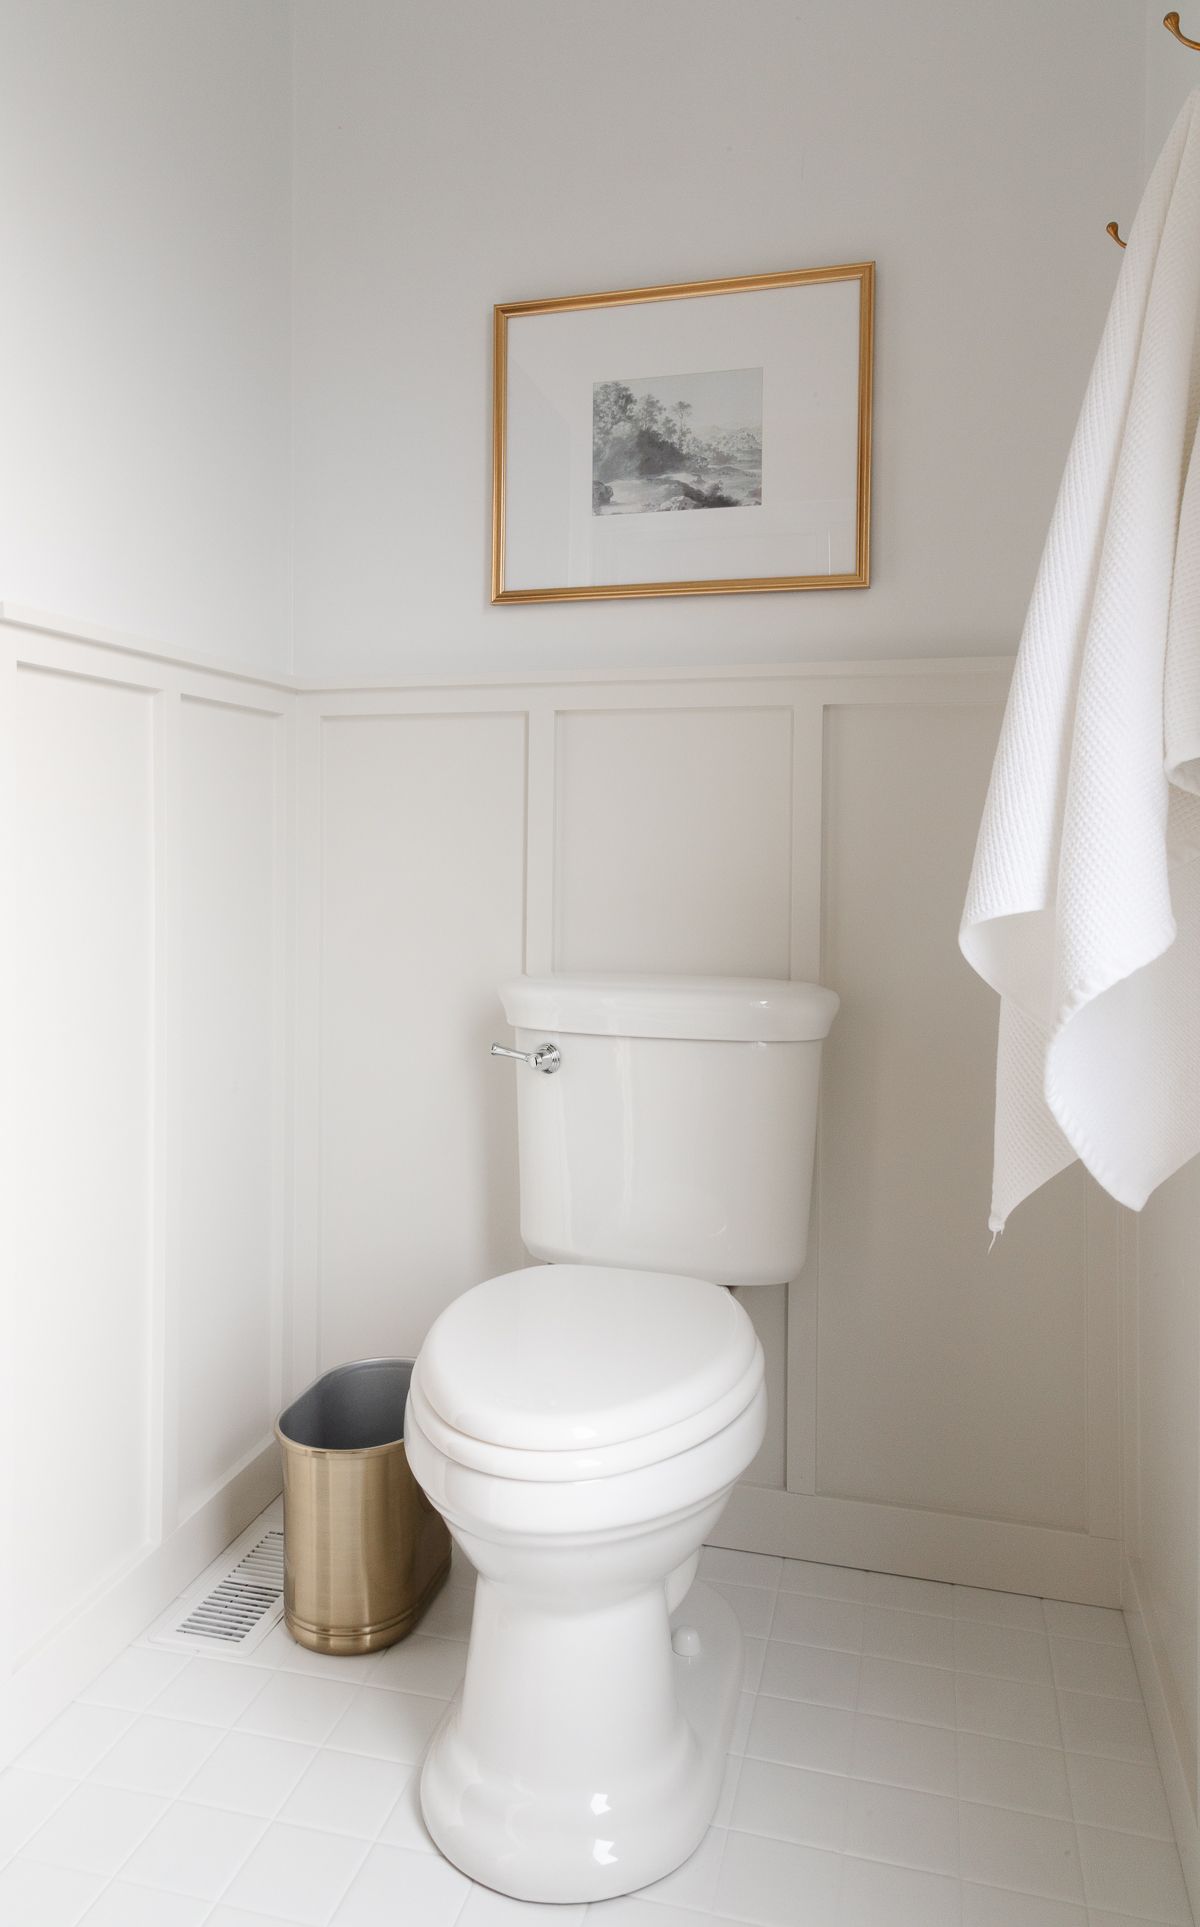 A small bathroom with white tile floors and gray board and batten on the walls